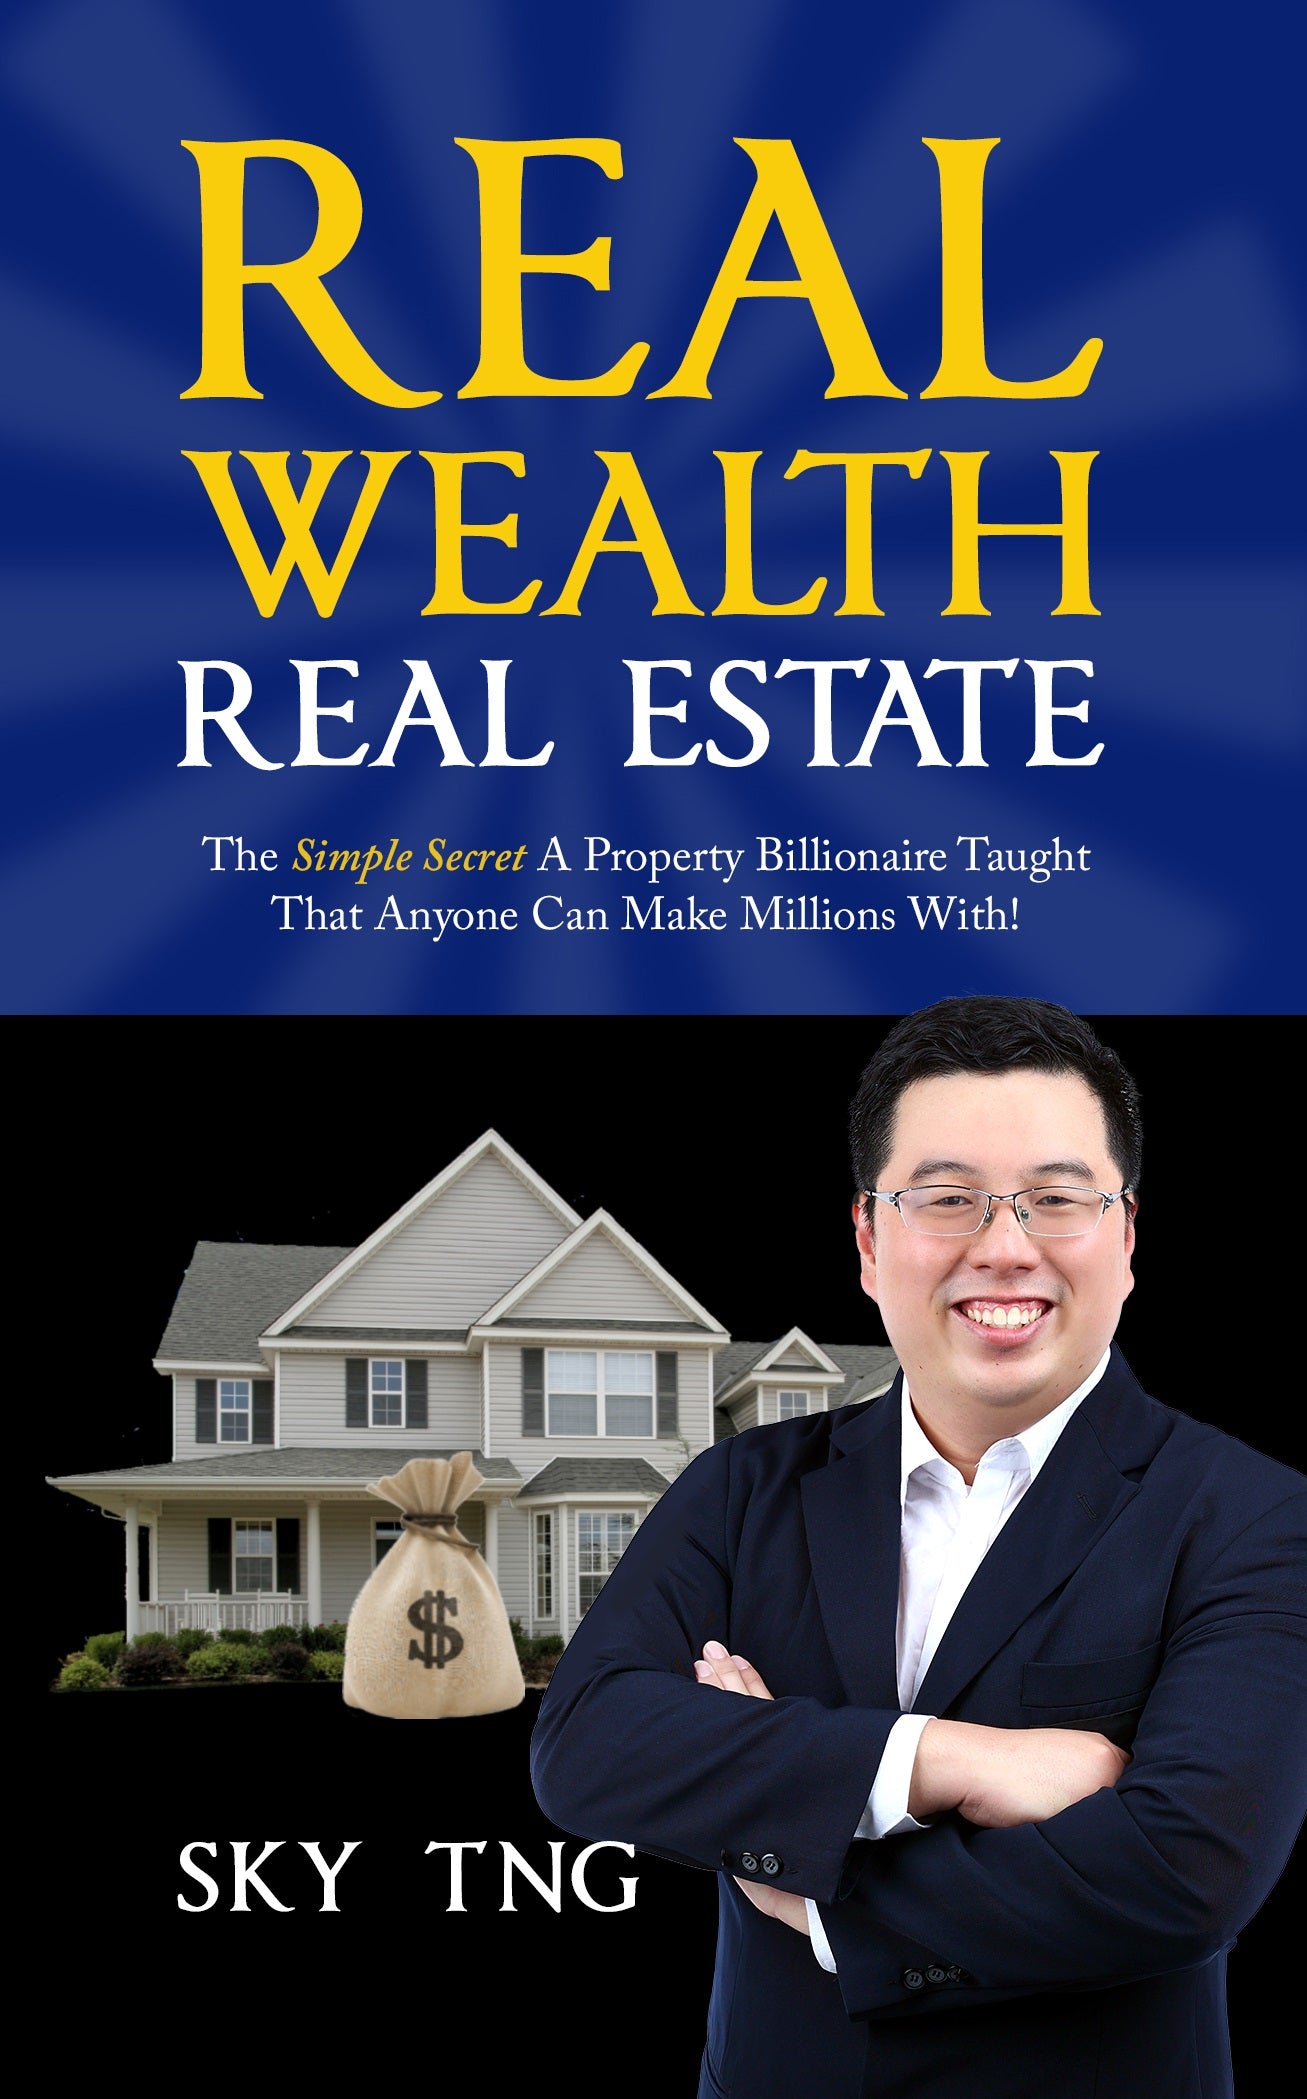 Real Wealth, Real Estate: The Simple Secret A Property Billionaire Taught That Anyone Can Make Millions With!